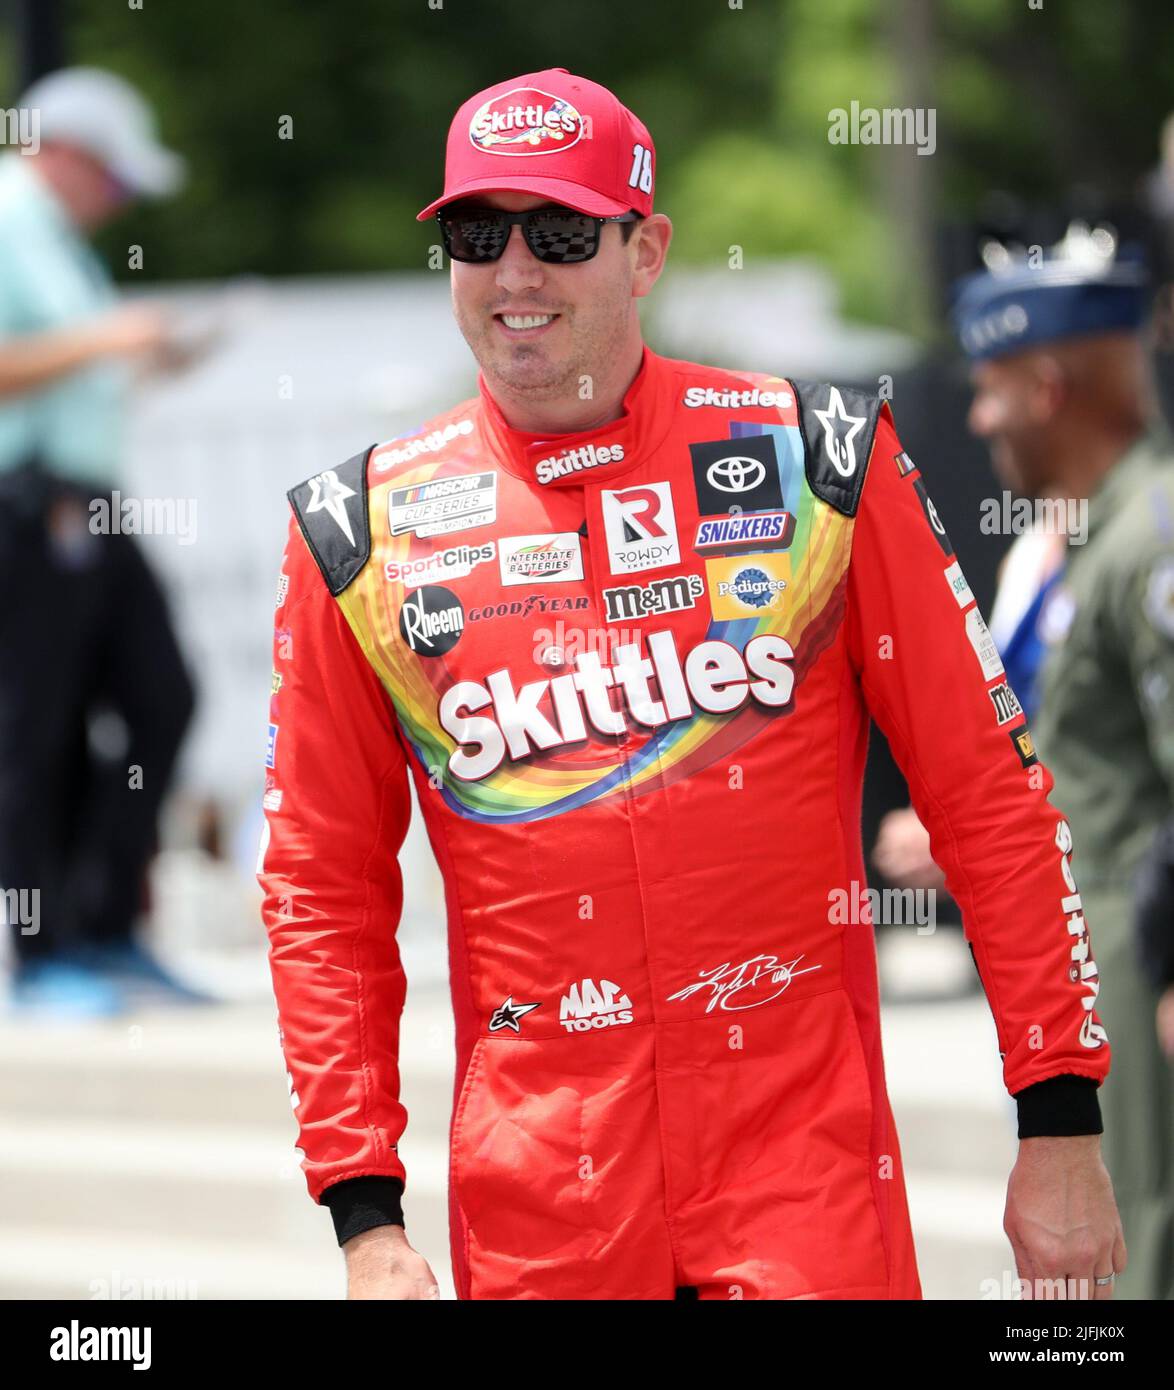 Plymouth, Wisconsin, USA. 3rd July, 2022. Kyle Busch, driver of the #18 Skittles America Mix Toyota, smiles after being introuced before the NASCAR Cup Series Kwik Trip 250 at Road America on July 03, 2022 in Plymouth, Wisconsin. Ricky Bassman/Cal Sport Media/Alamy Live News Stock Photo